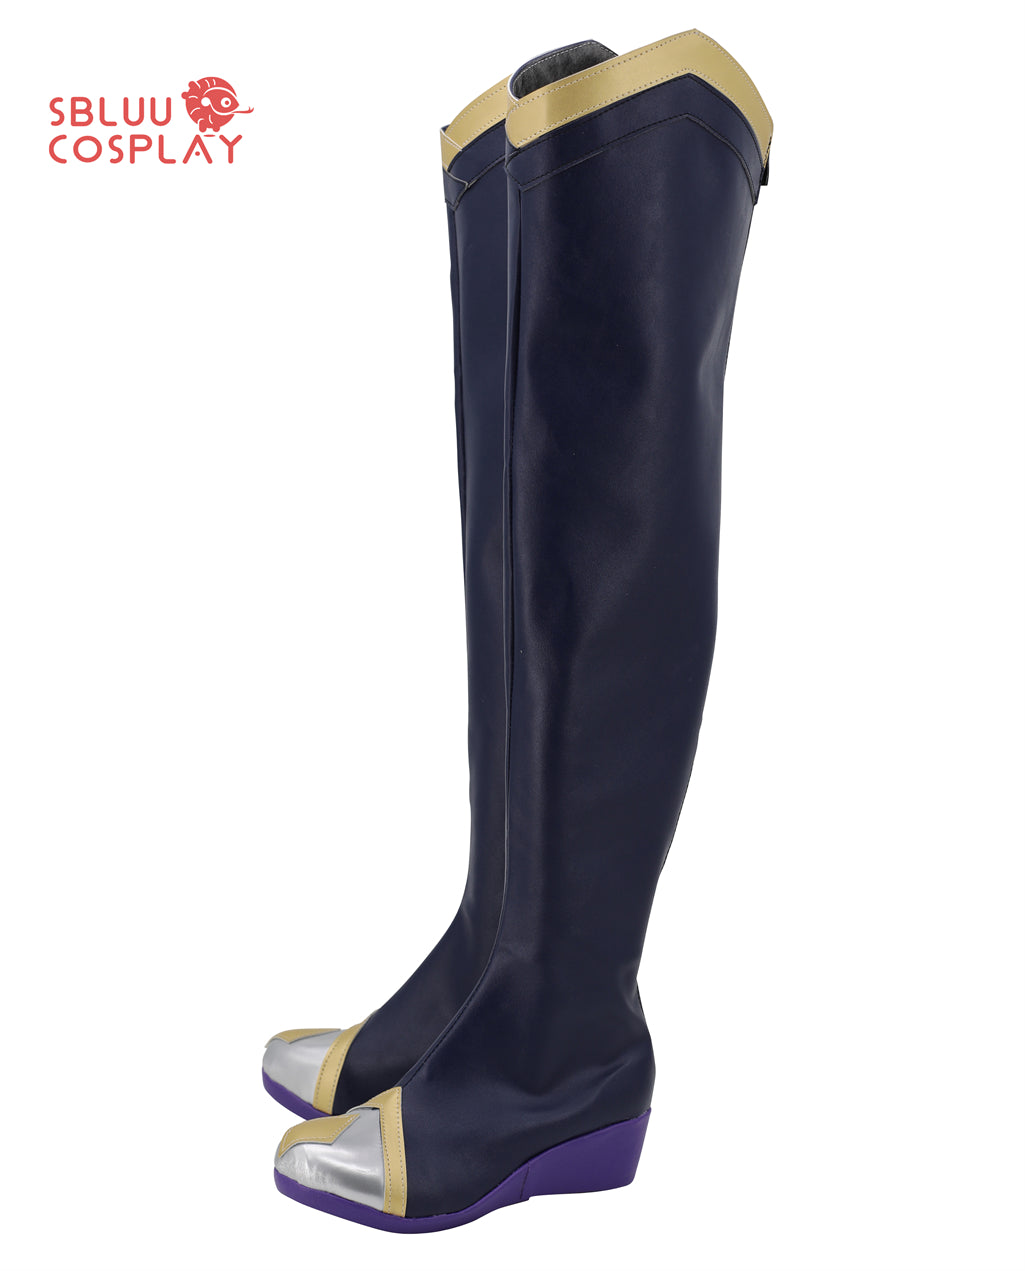 SBluuCosplay LOL DRX Ashe Cosplay Shoes Boots